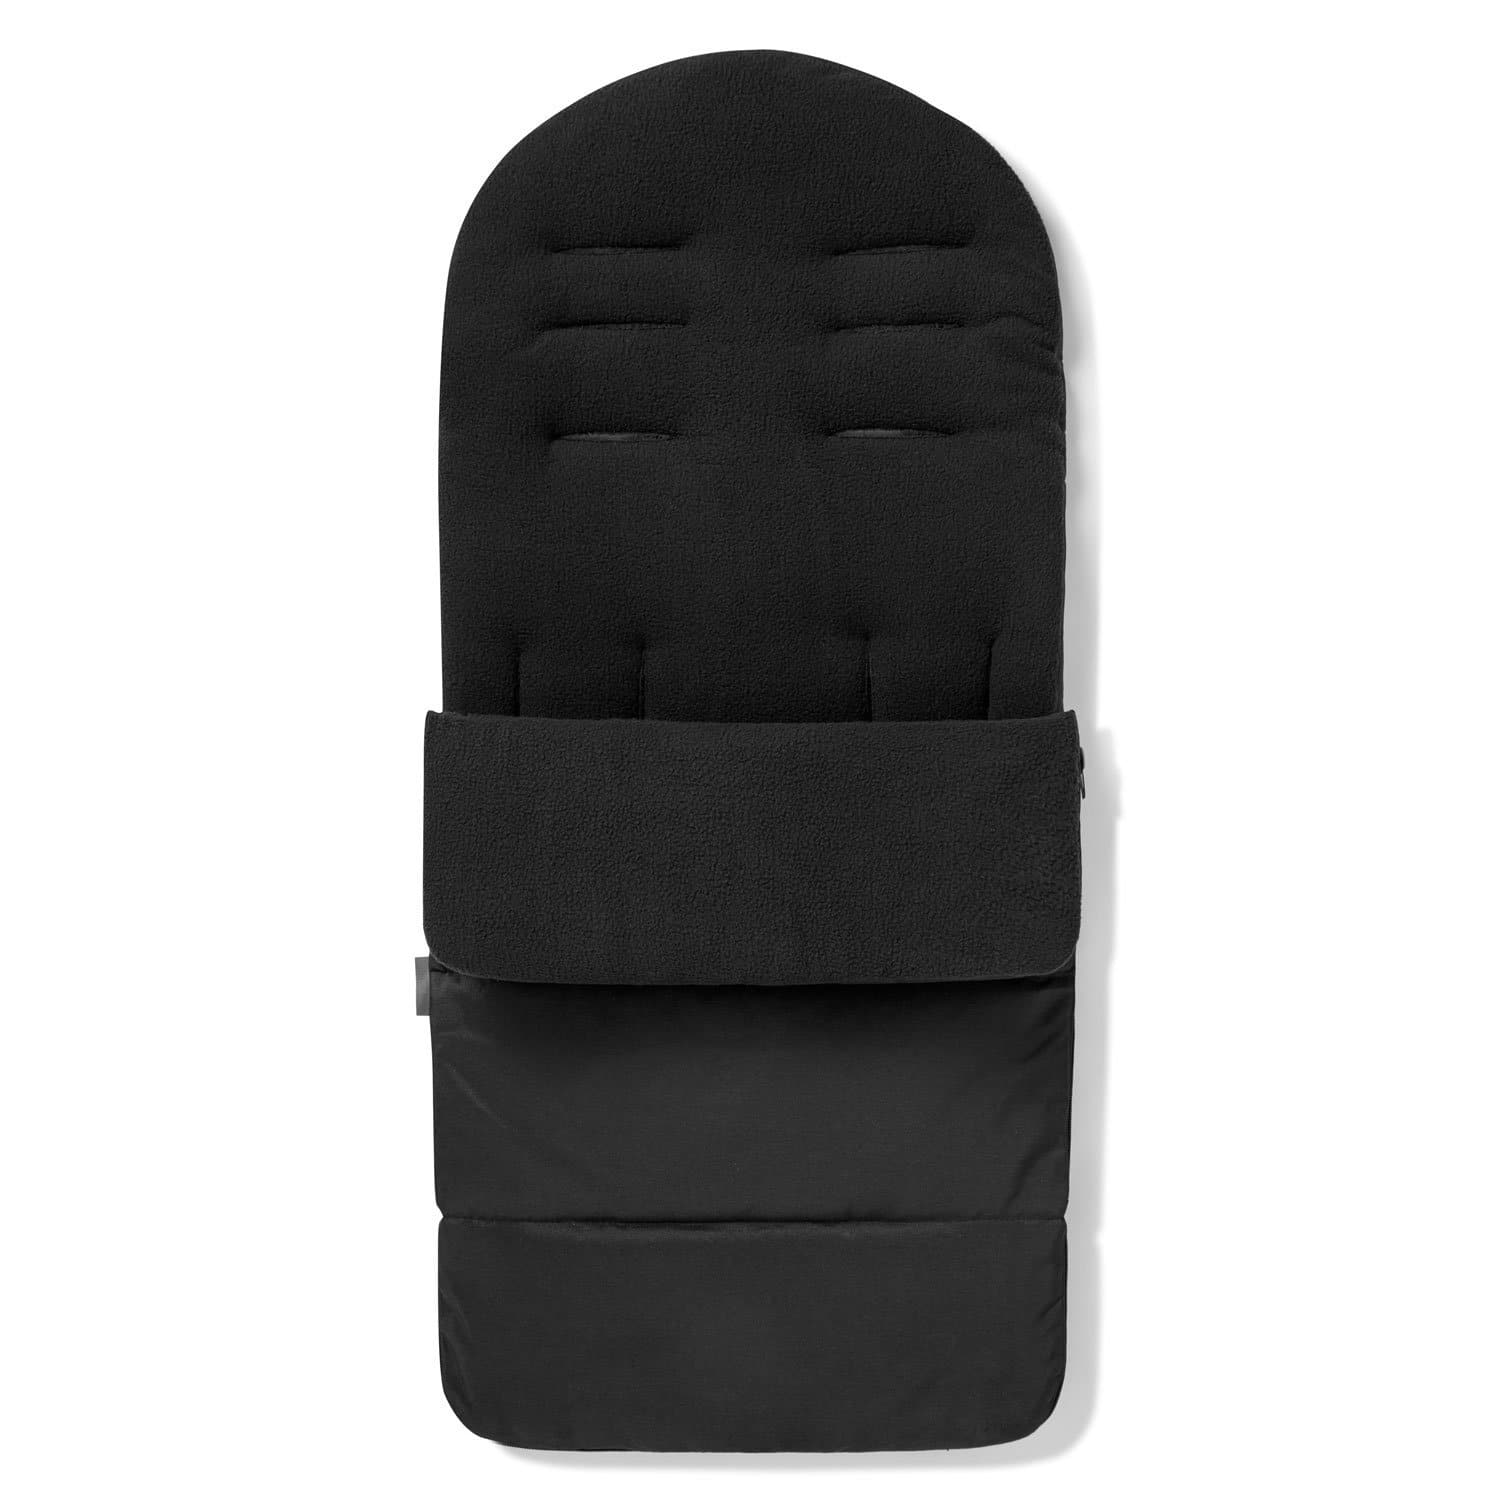 Premium Footmuff / Cosy Toes Compatible with Quinny - Black Jack / Fits All Models | For Your Little One